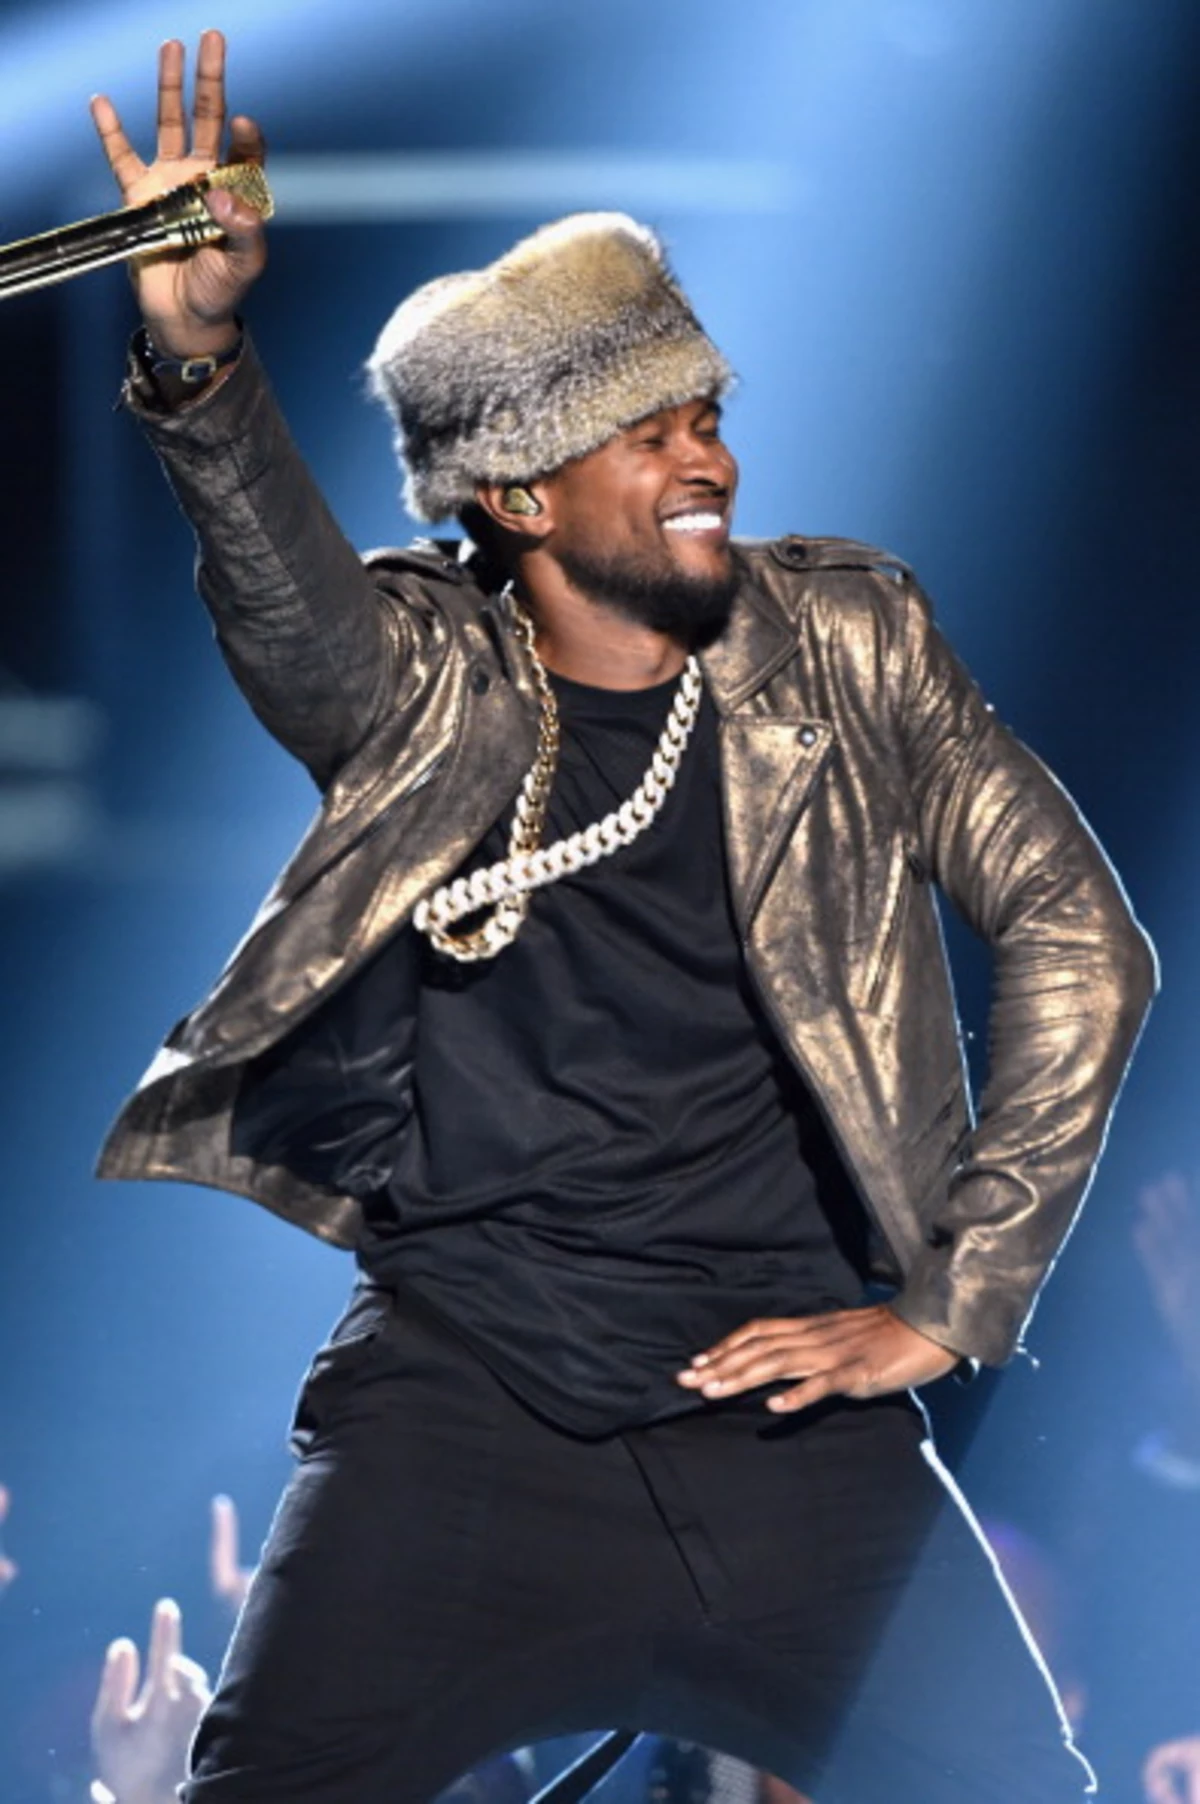 Usher Baby Performs at BET Awards![VIDEO] HOT After Dark with Linda Love